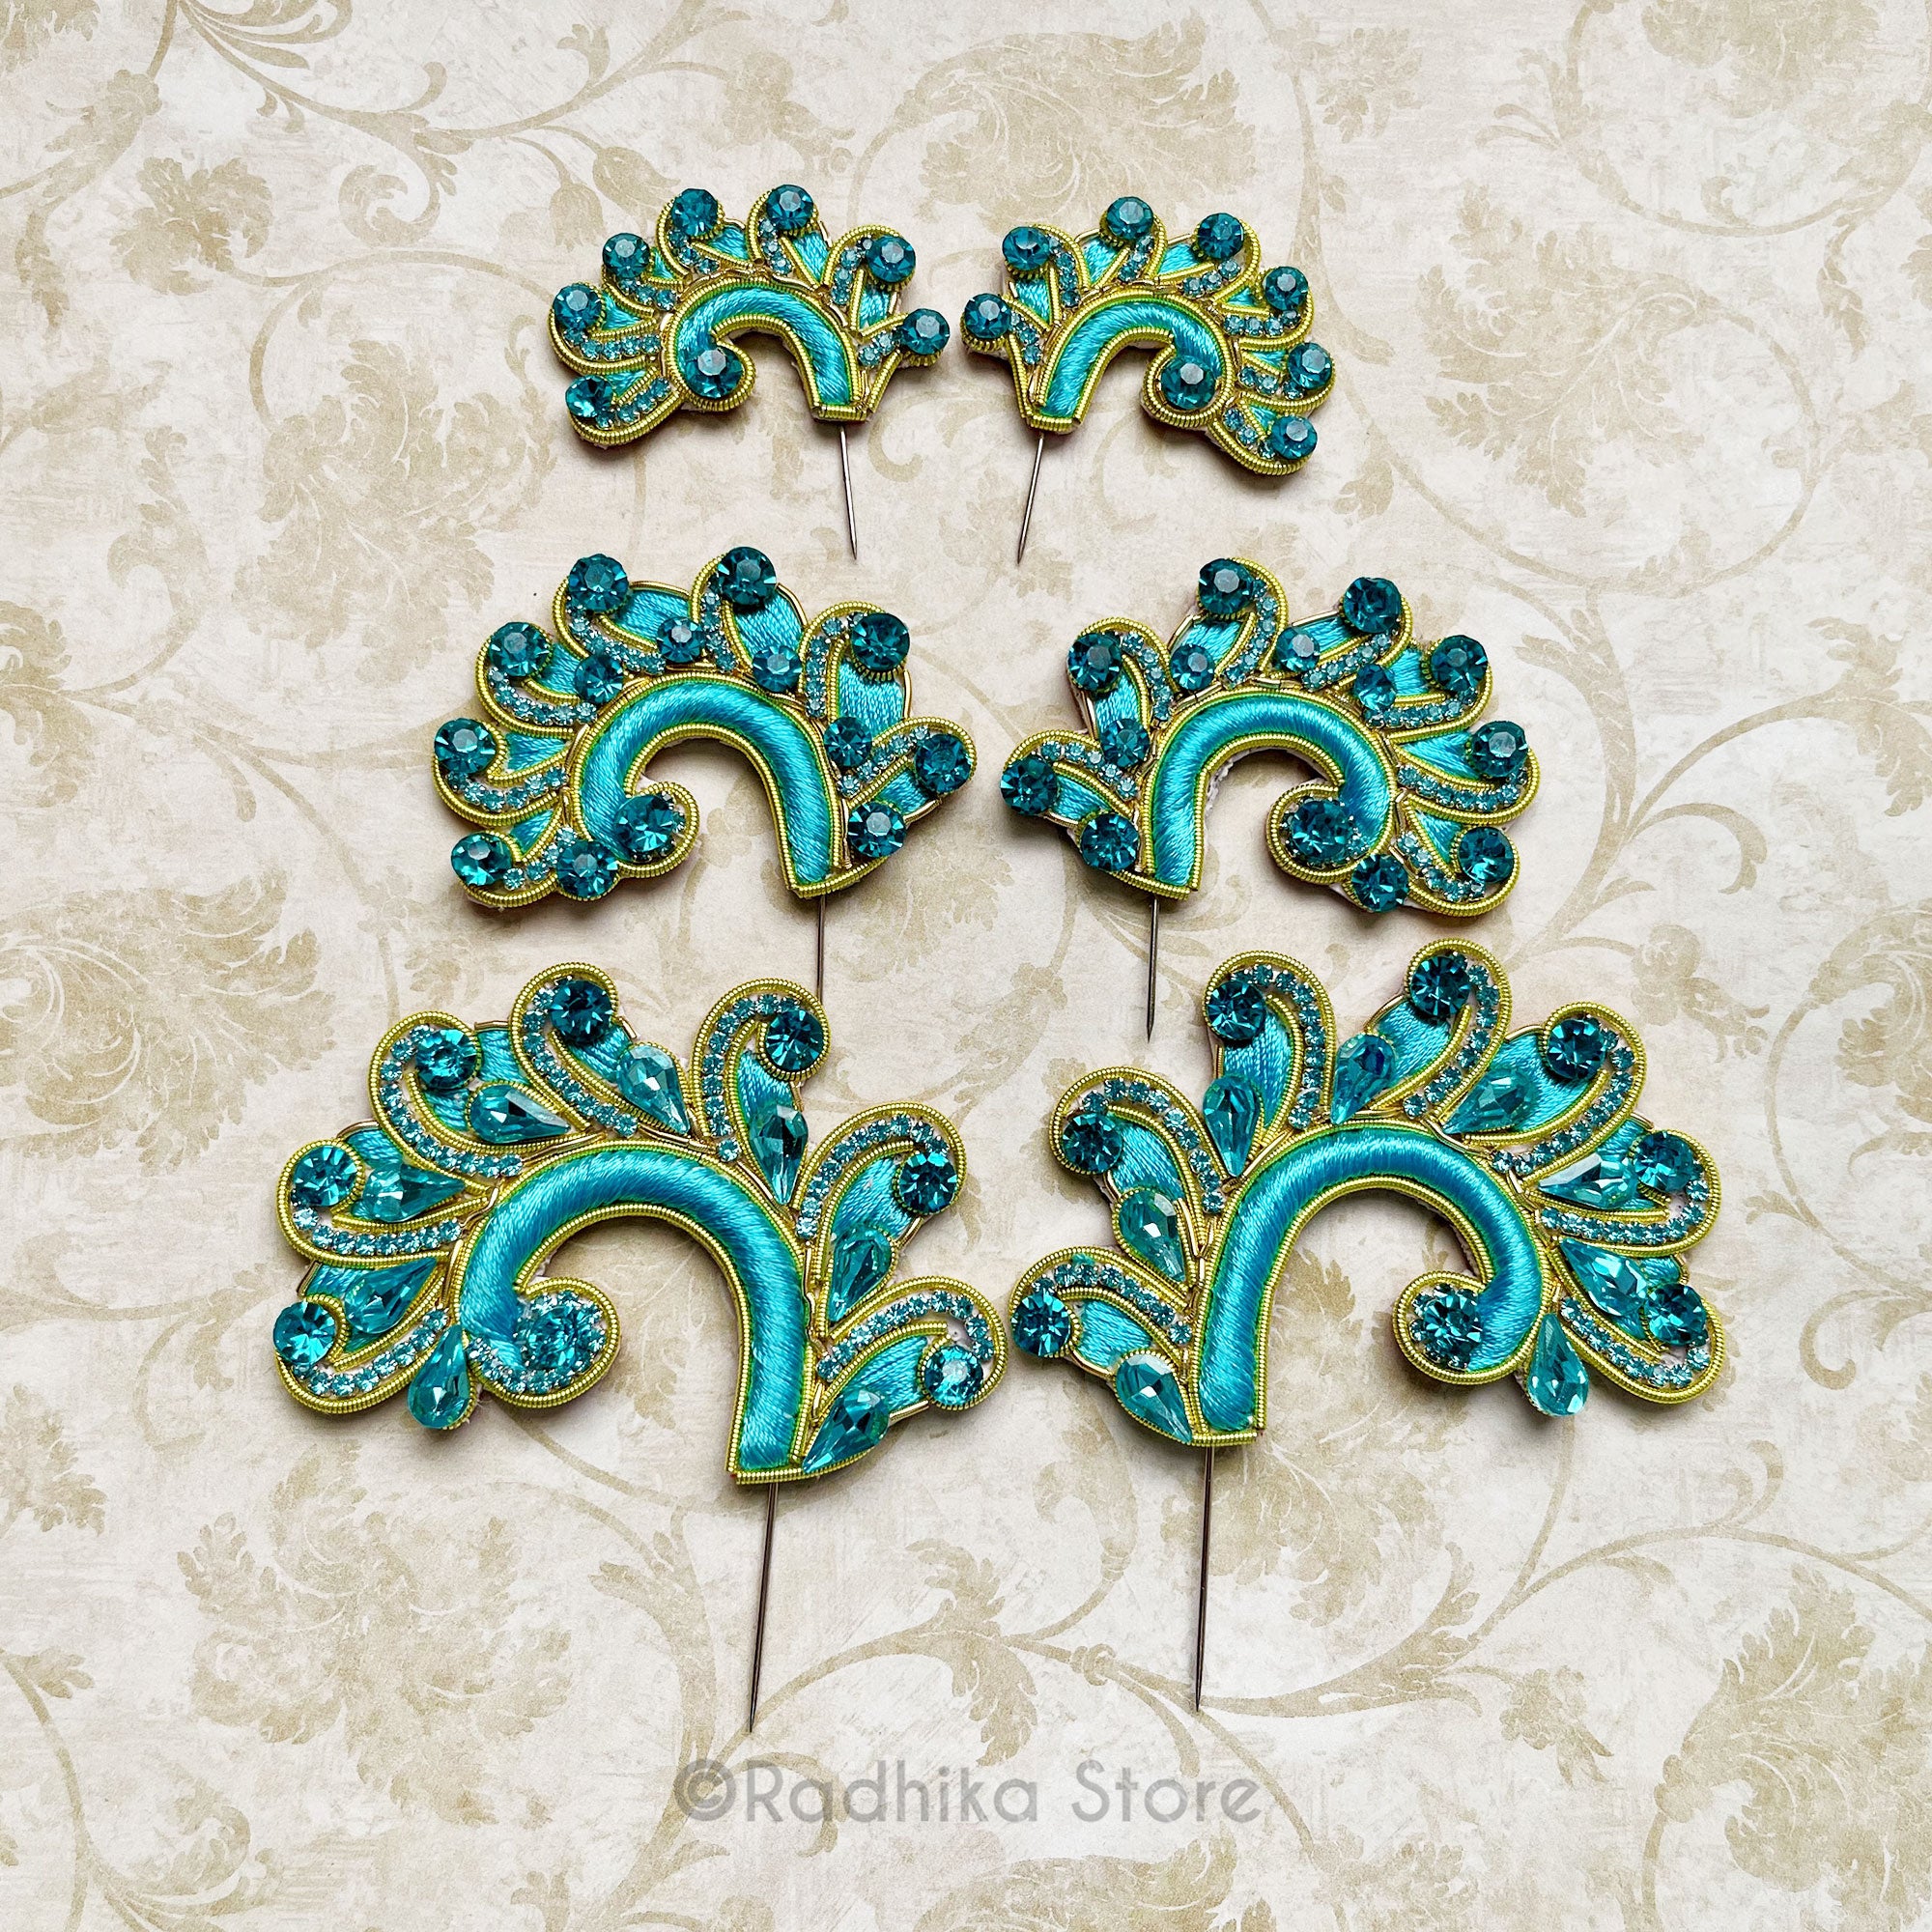 Peacock Curls - Teal Blue - Embroidery Turban Pins Set of 2